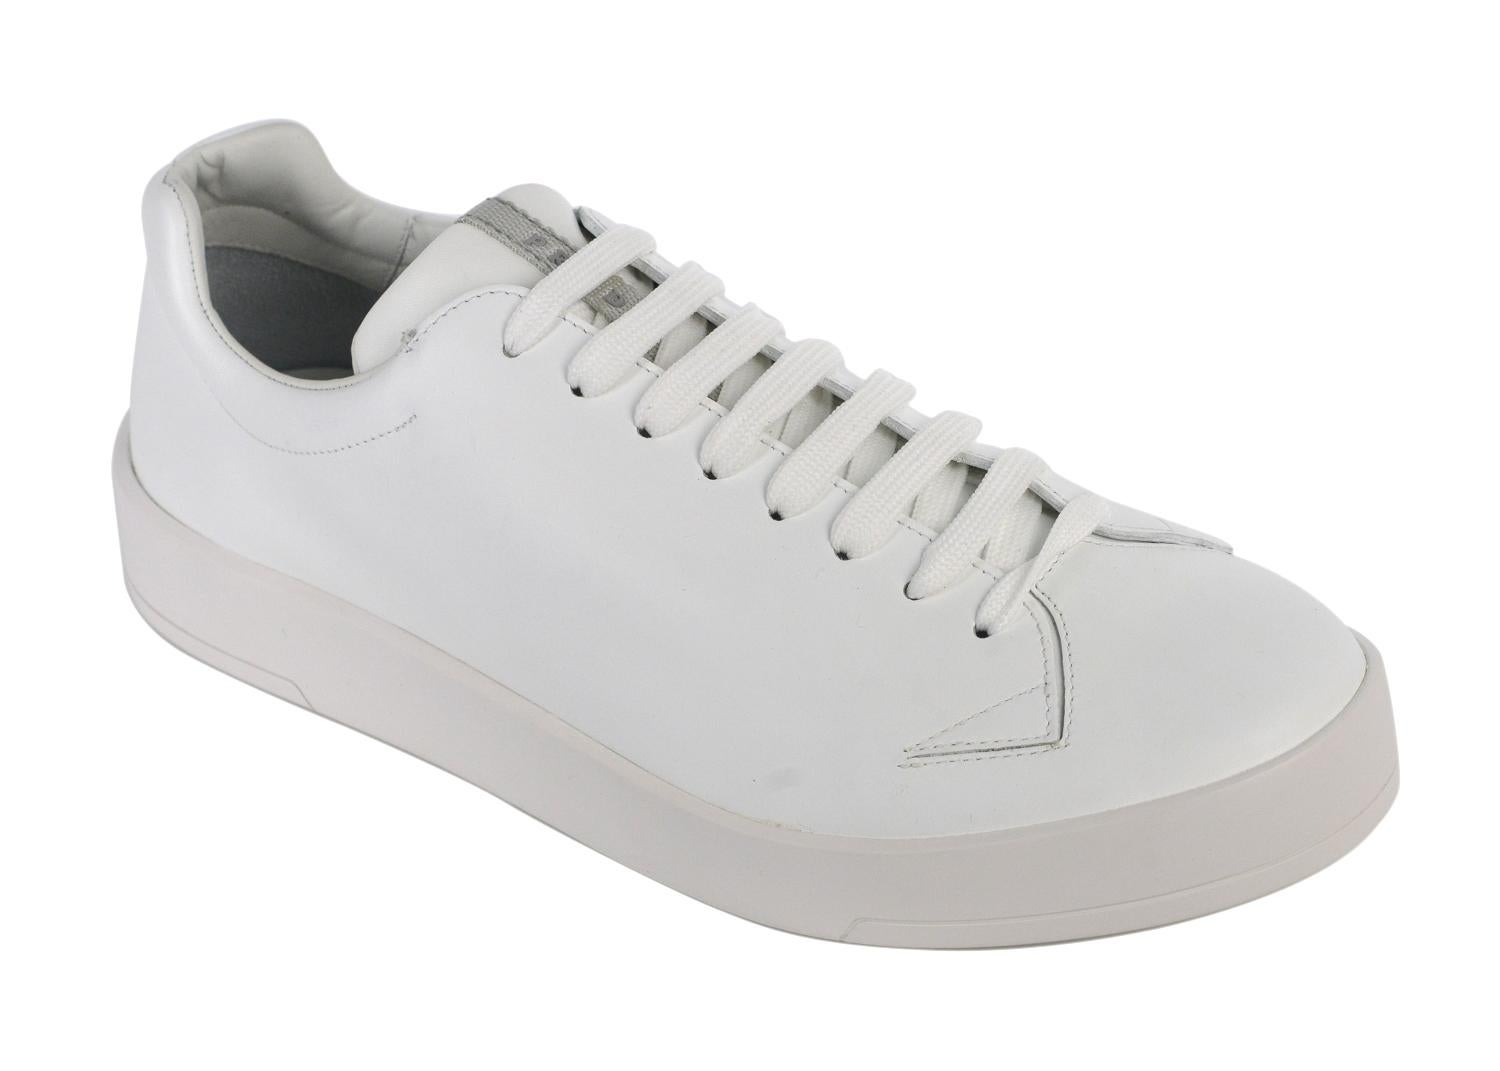 Prada is known for high quality Italian crafted leather all across the world. Add these low top sneakers to your wardrobe and compliment the globe. These sneakers feature pure smooth white leather, tonal low top lace up closure, and smooth